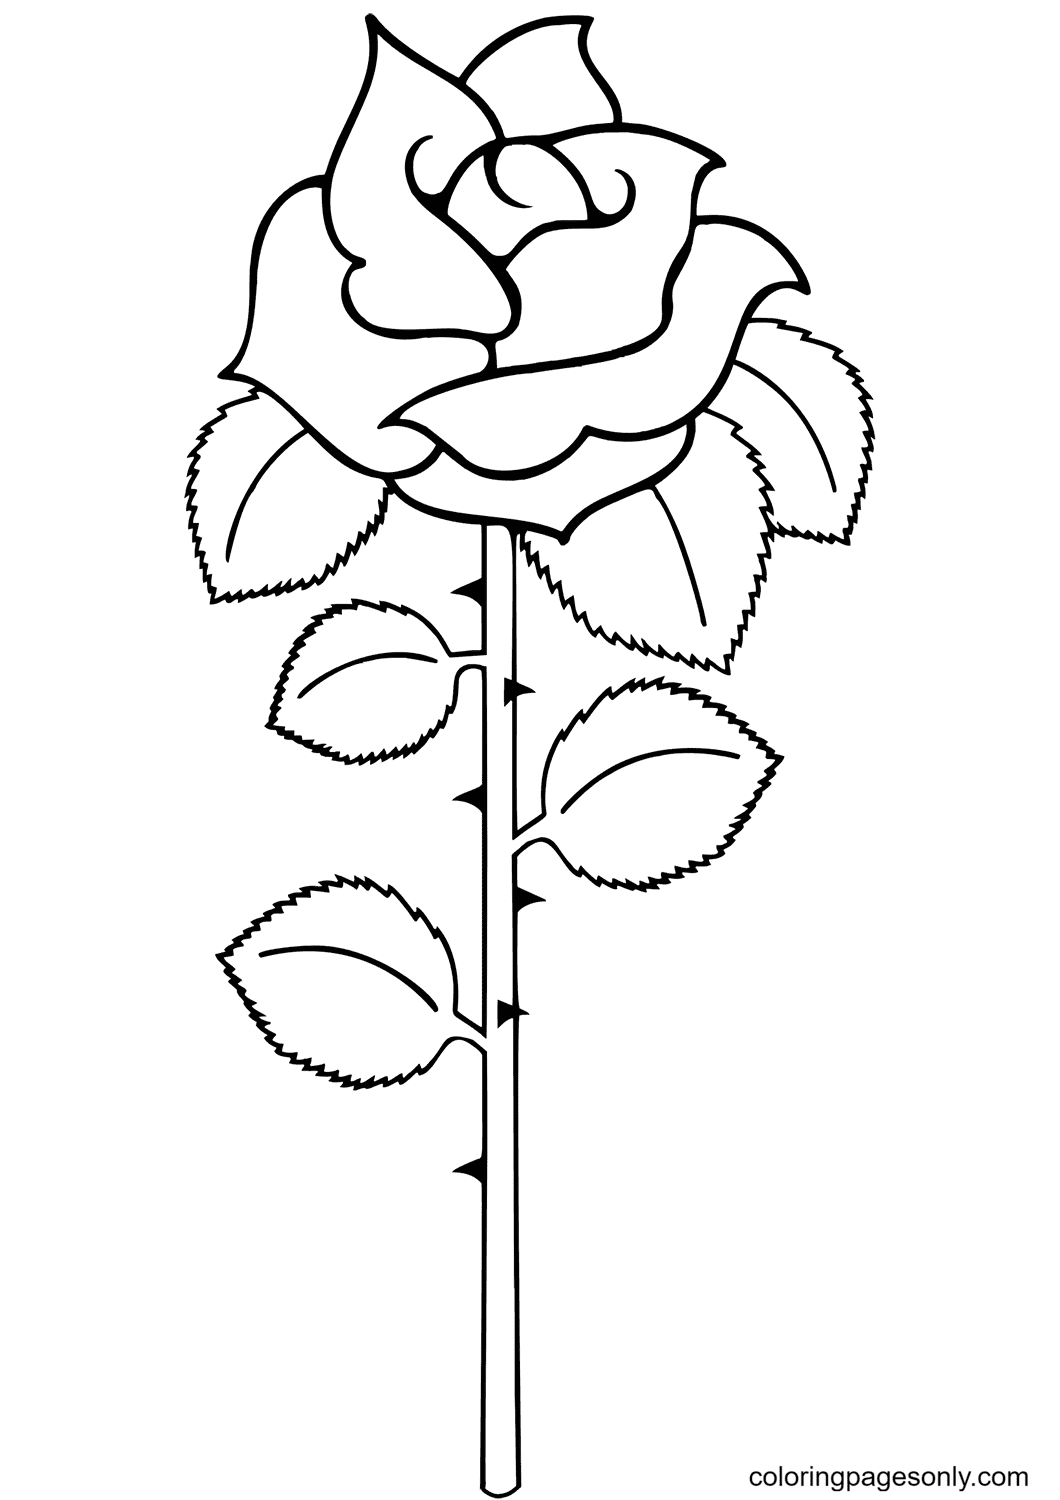 Simple Rose with Leaves Coloring Pages   Rose Coloring Pages ...